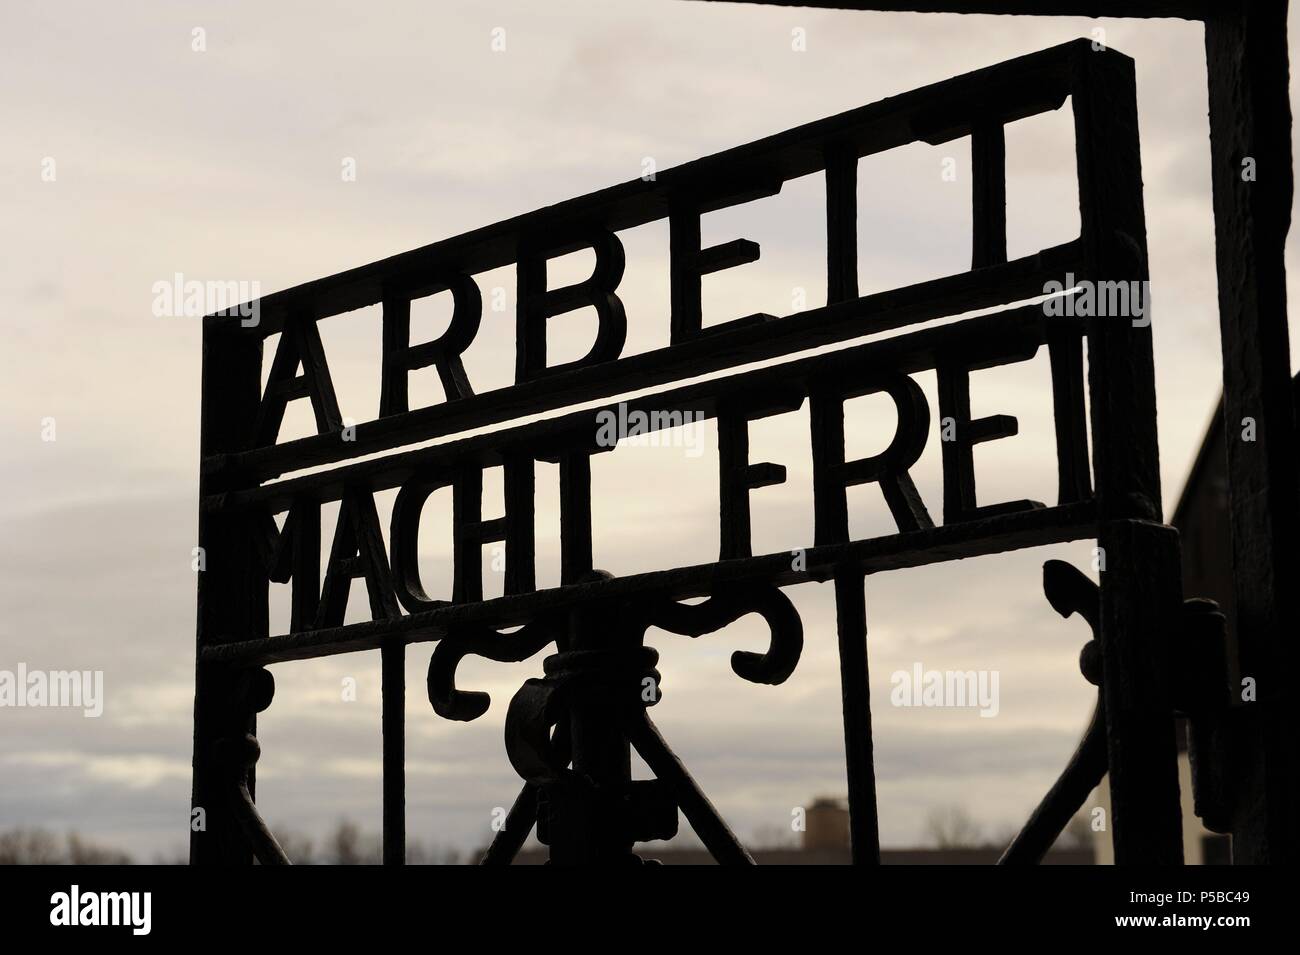 Dachau Concentration Camp. Nazi camp of prisoners opened in 1933. Detail of the slogan Arbeit macht frei (Labour makes free) at the main door. Germany. Stock Photo